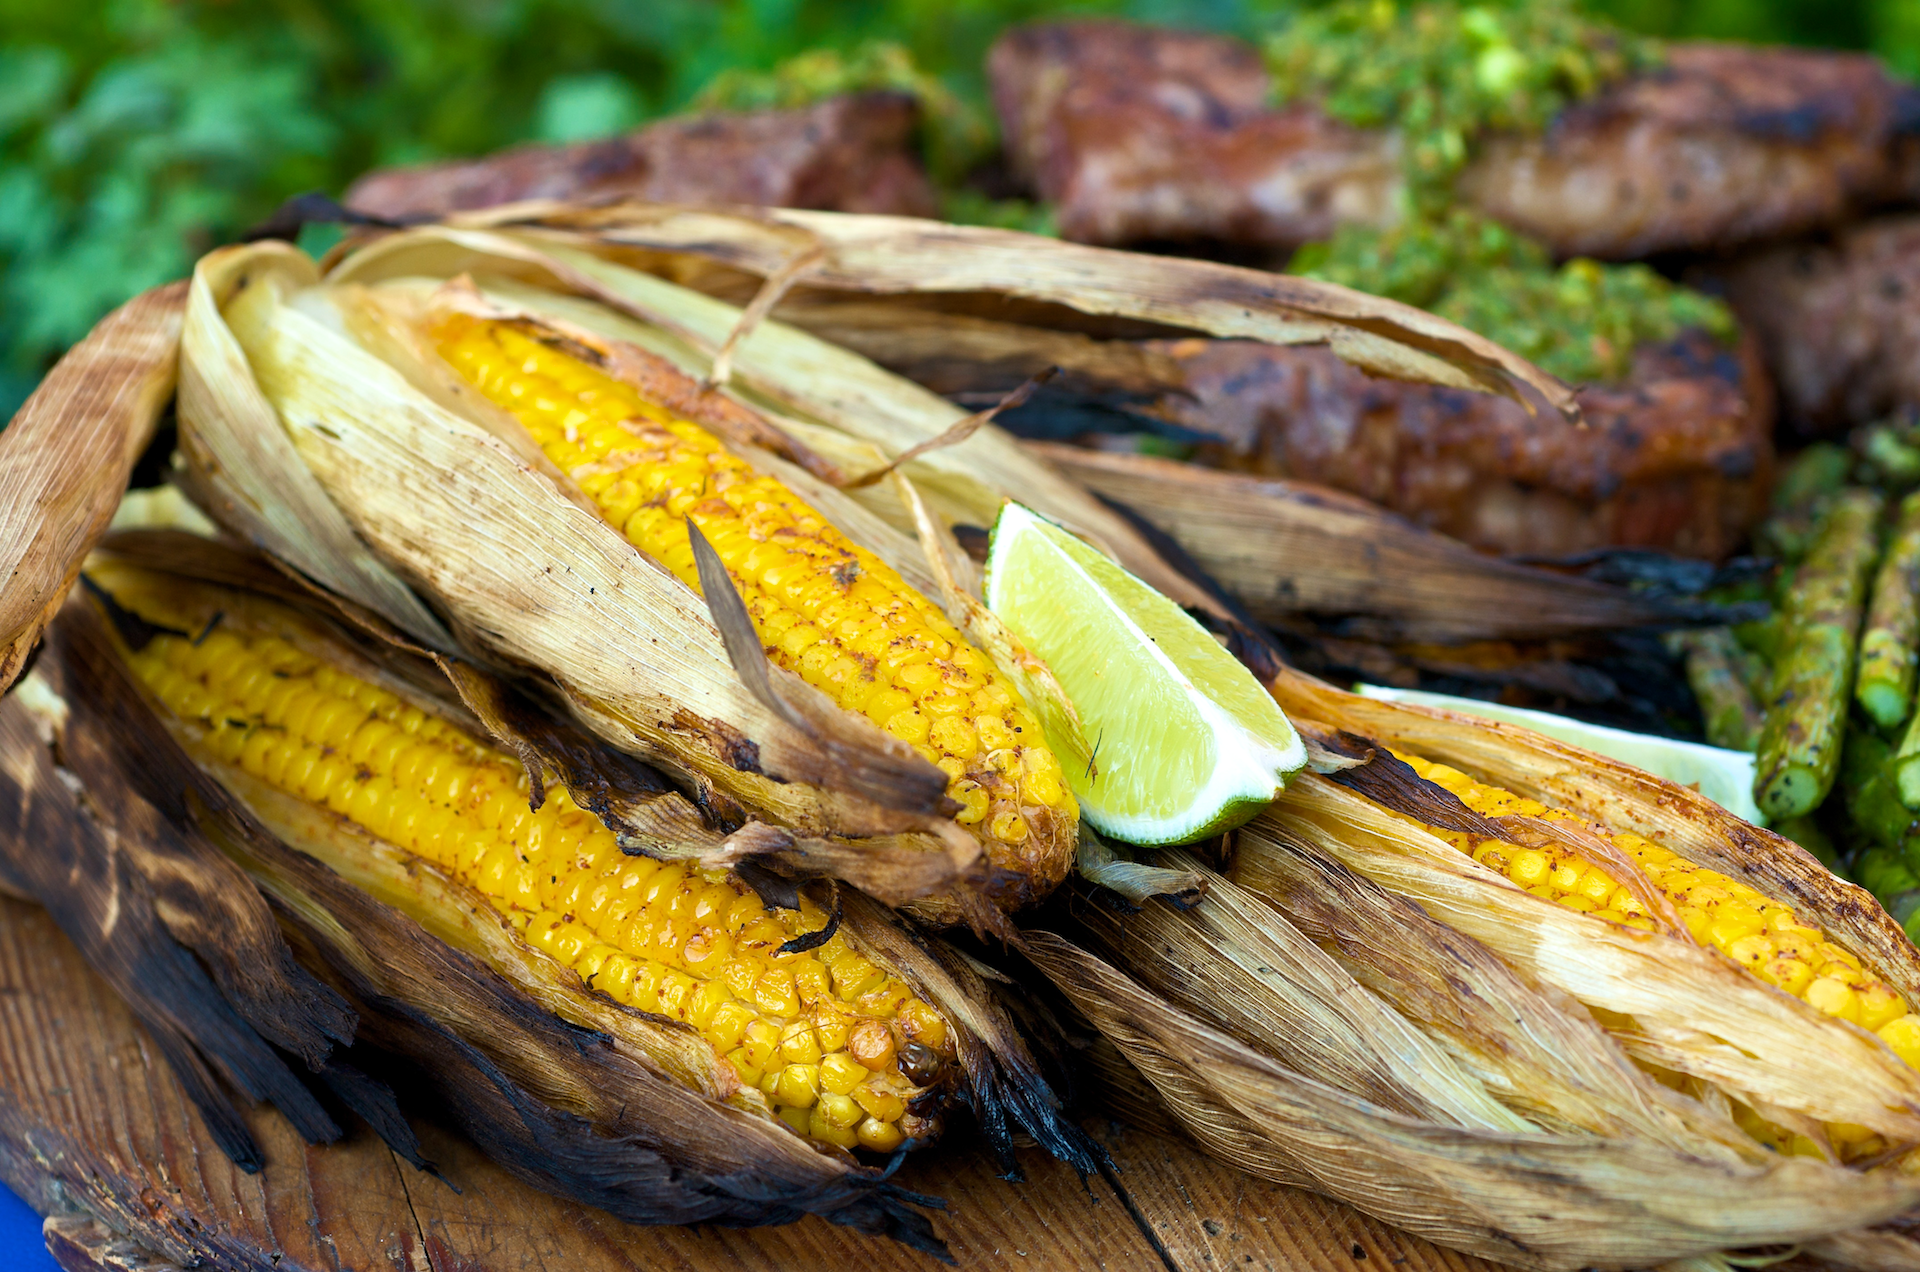 This is a great time to get fresh corn from the local farmers market. The smoky chipotle really enhances the hot-off-the-grill summer taste of sweet corn on the cob. Try it!